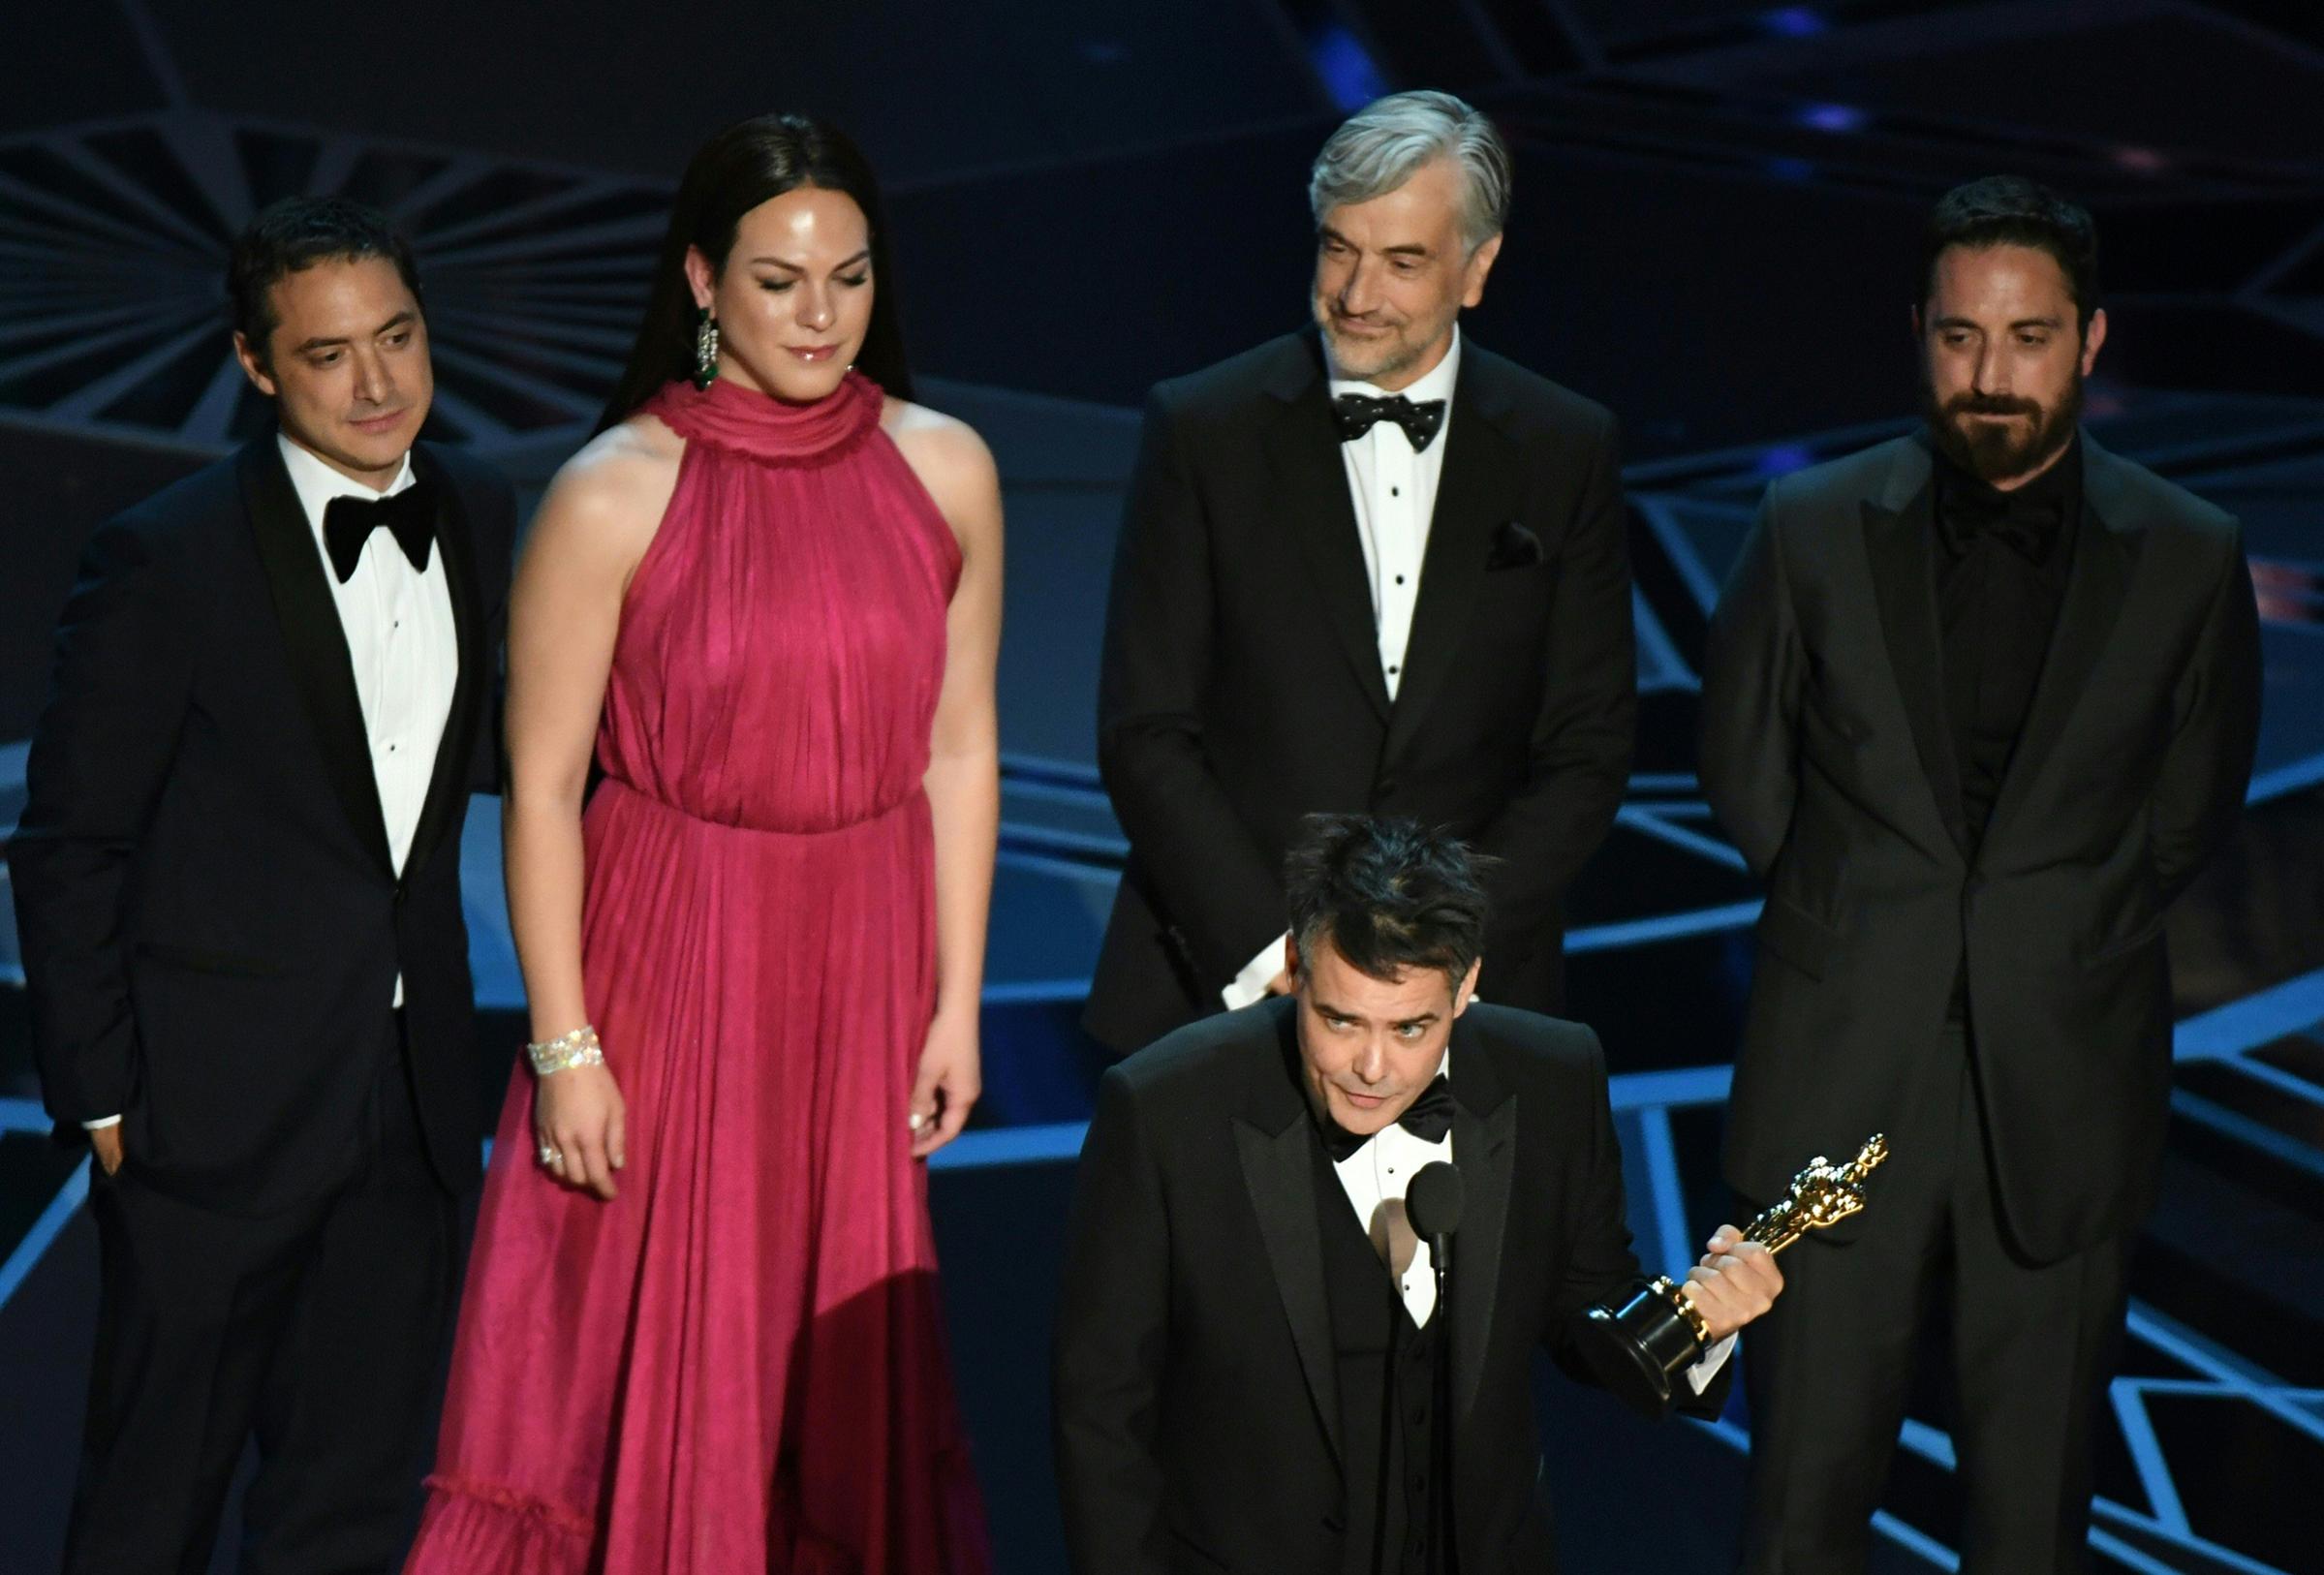 Chilean director Sebastian Lelio delivers a speech after he won the Oscar for Best Foreign Language Film for "A Fantastic Woman" during the 90th Annual Academy Awards show on March 4, 2018 in Hollywood.